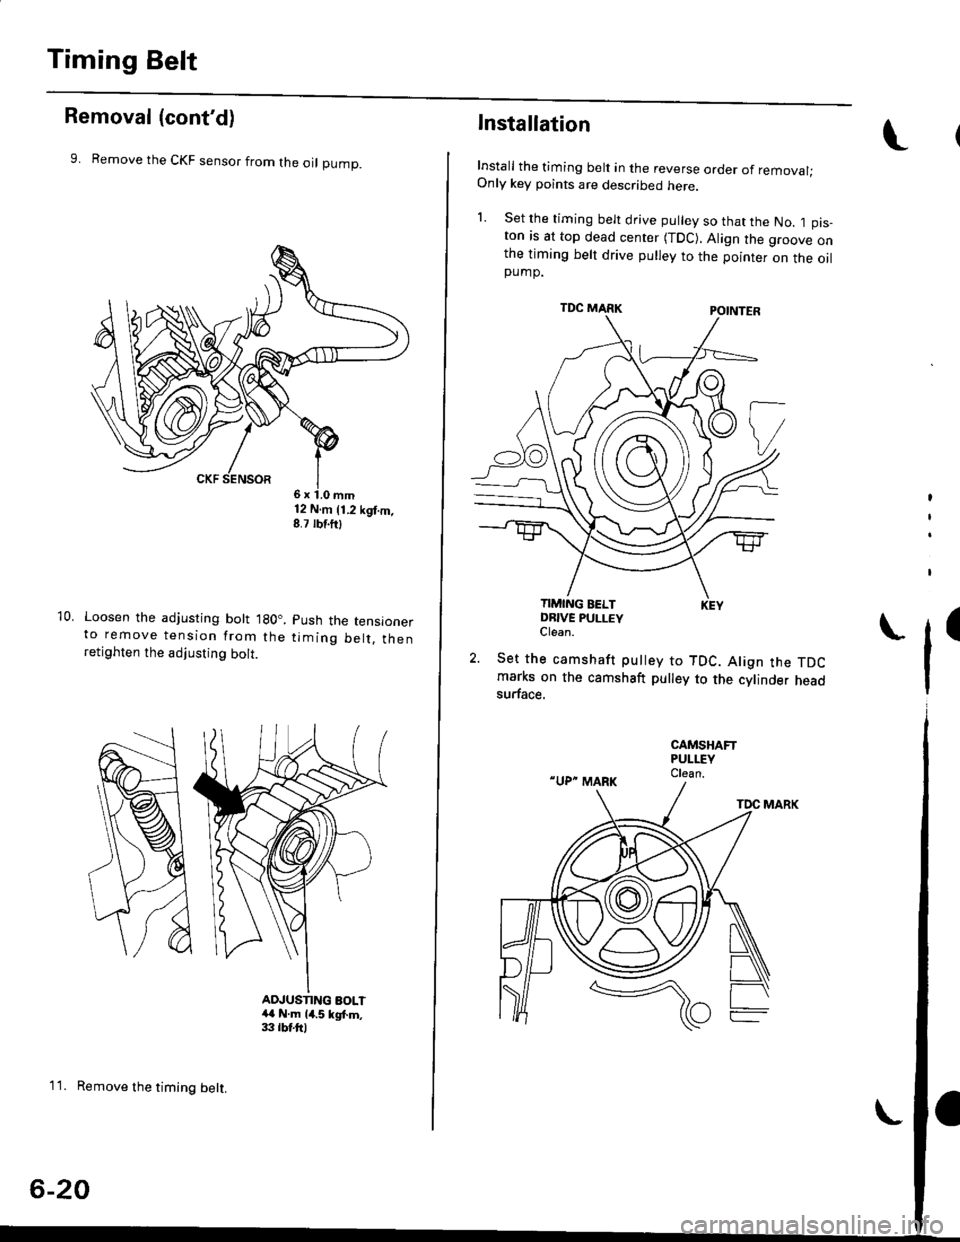 HONDA CIVIC 1998 6.G Workshop Manual Timing Belt
Removal (contd)
9. Remove the CKF sensor from the oI pump.
10. Loosen the adjusting bott lgO..to remove tension from theretighten the adjusting bolt.
12 N.m 11.2 kgt.m,8.7 rbf.ftl
Push th